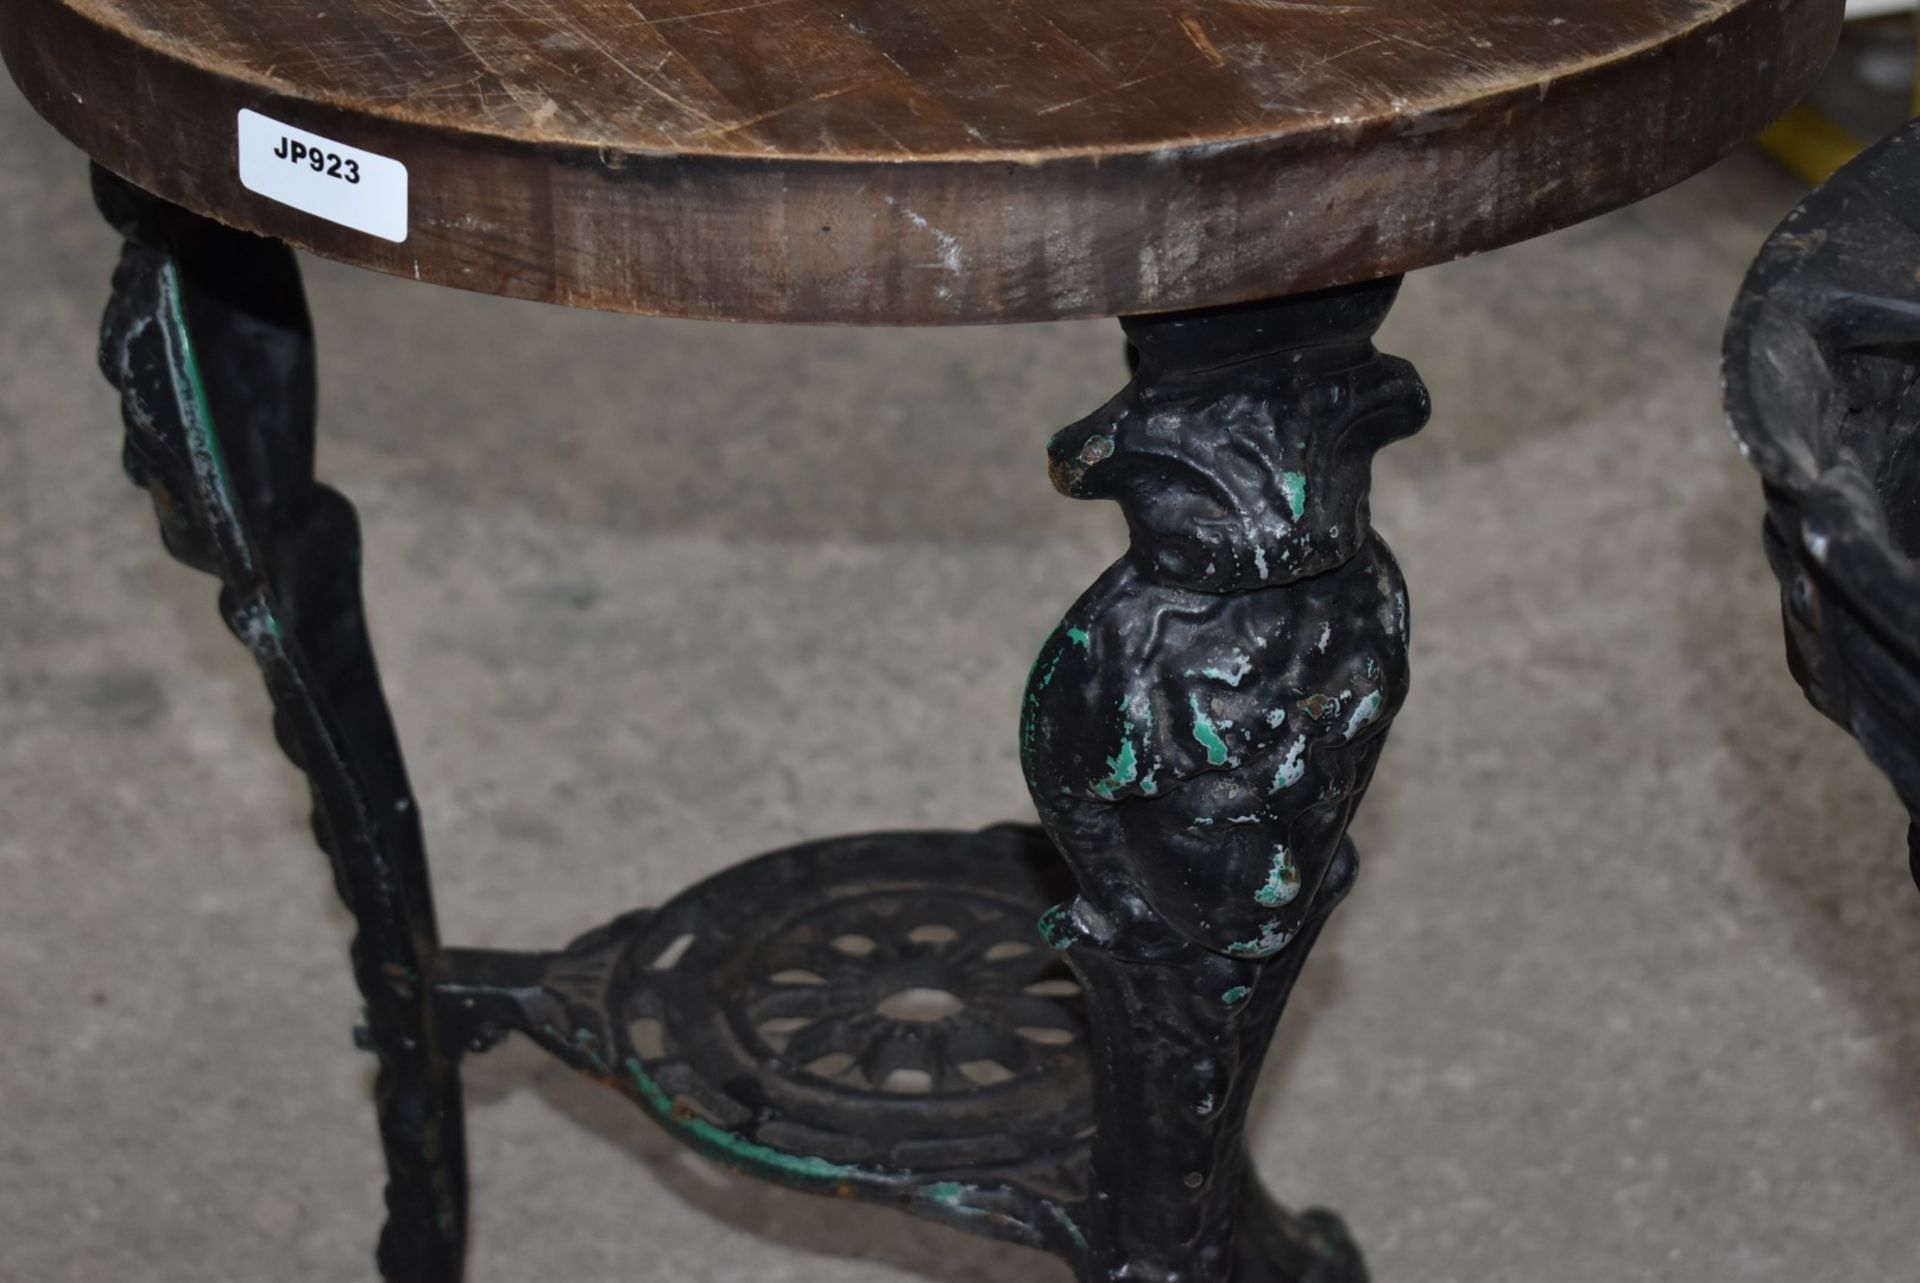 2 x Vintage Ornate Cast Iron Table Bases With Wooden Top - Dimensions: H70 x W50 cms - Ref: JP923 - Image 5 of 8